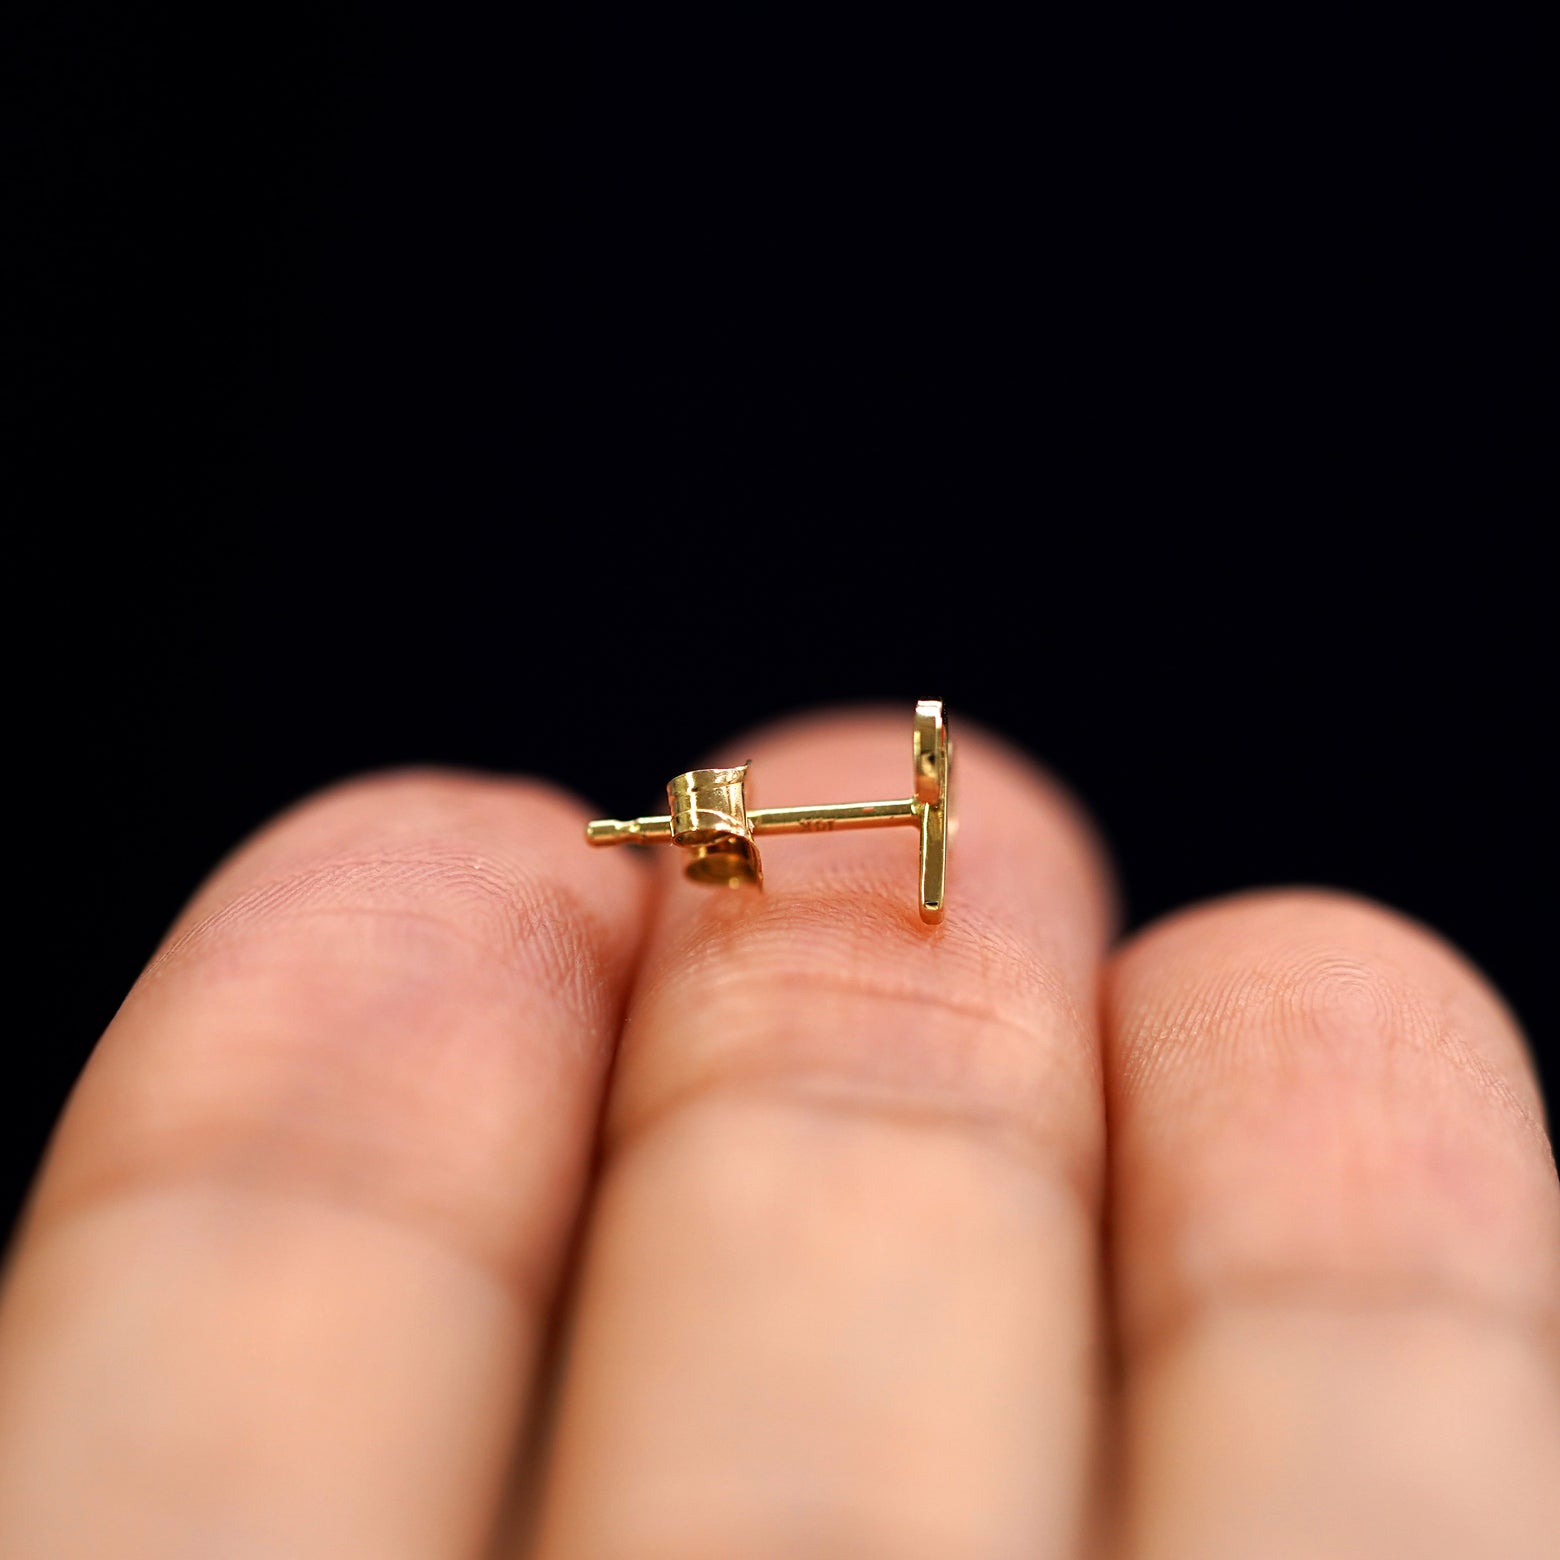 A 14k gold Aries Horoscope Earring sitting sideways on a model's fingertips to show detail